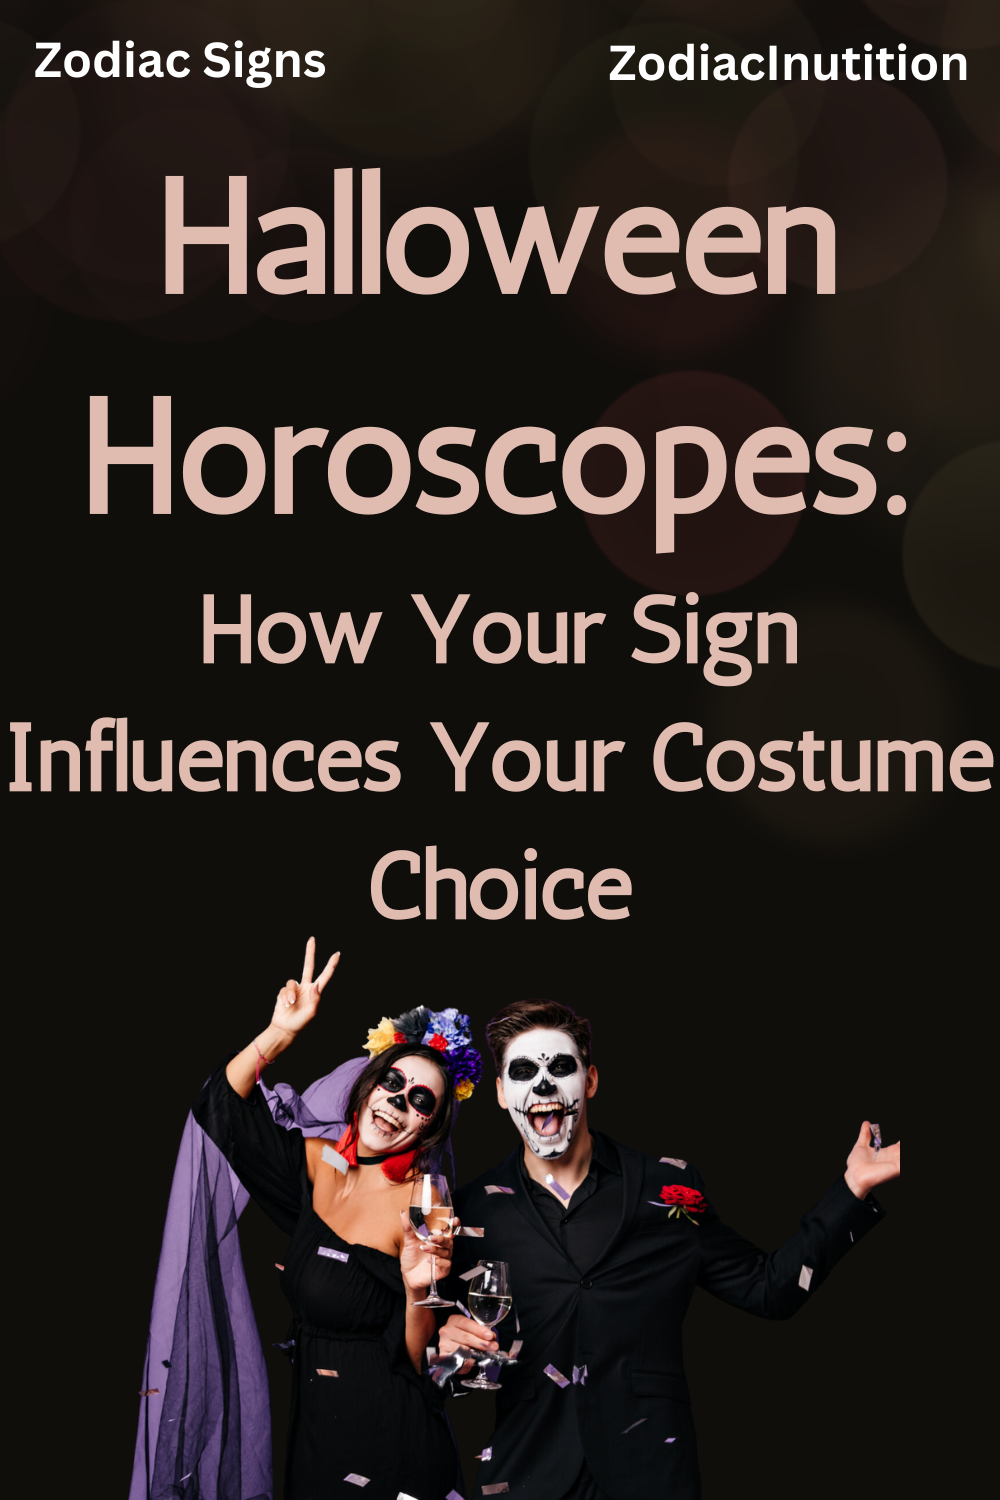 Halloween Horoscopes: How Your Sign Influences Your Costume Choice